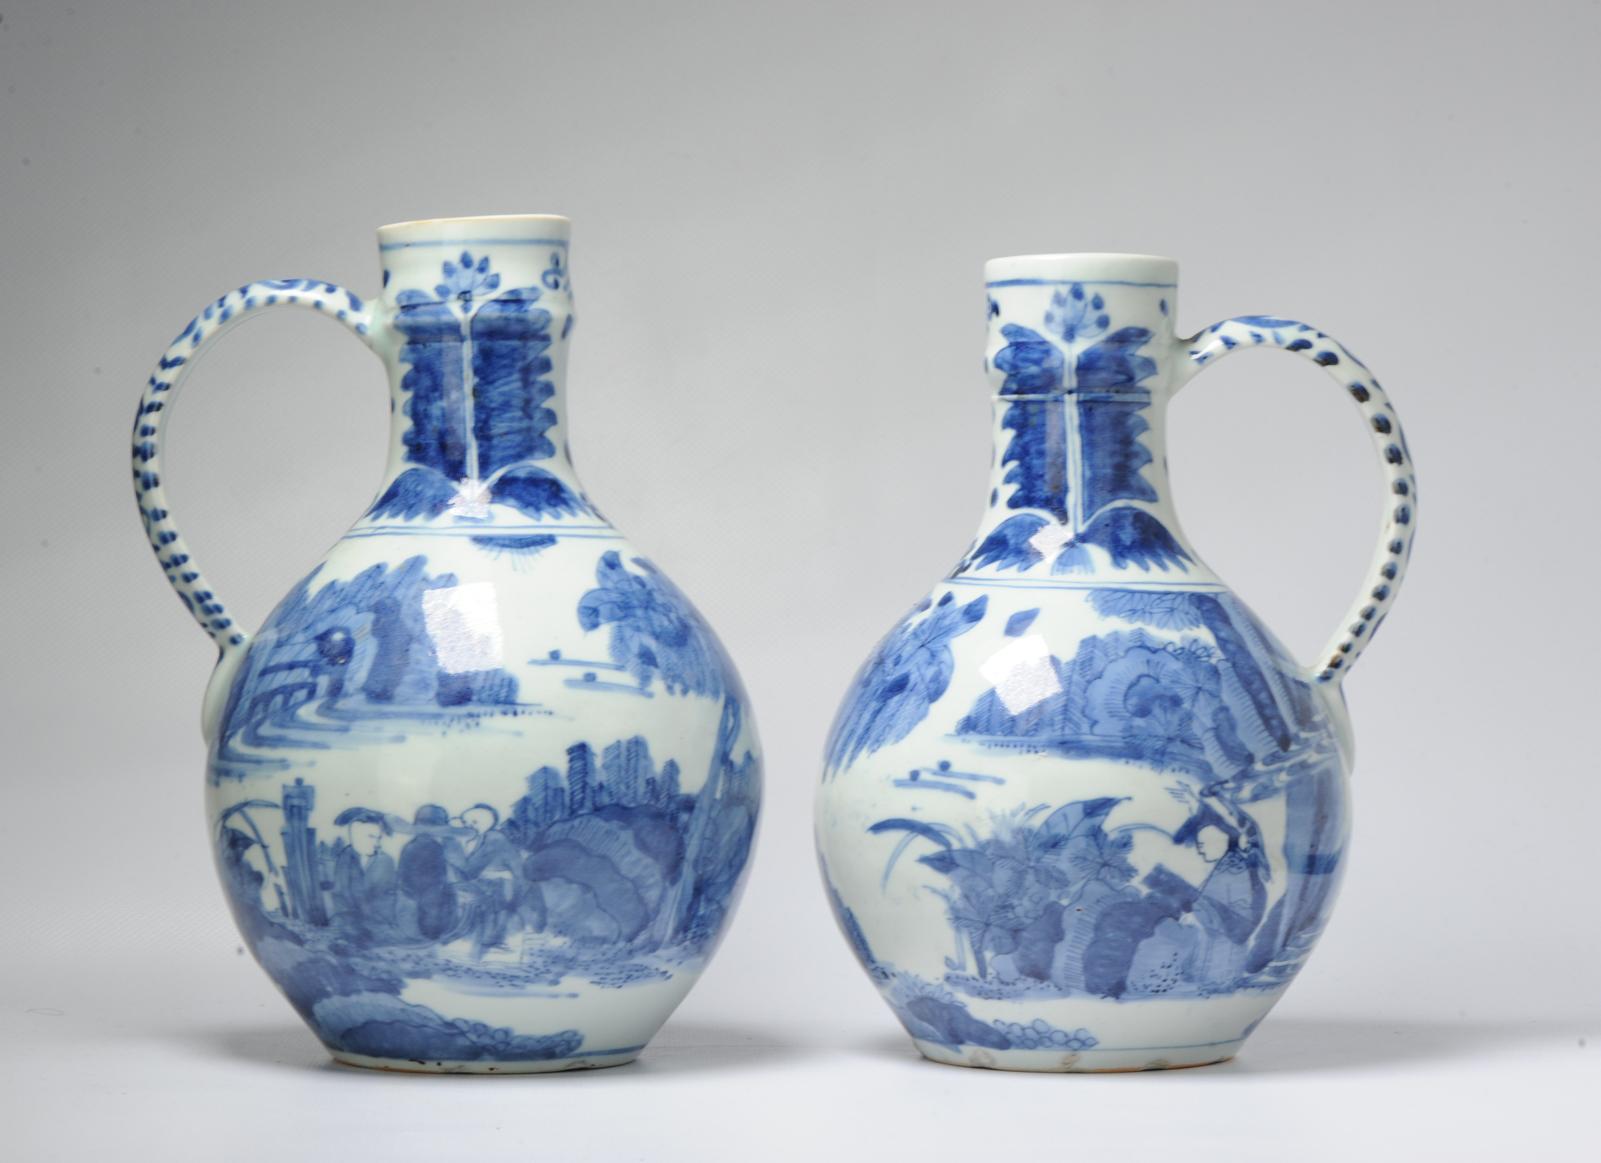 Pair 17th century Japanese Porcelain Figural Jugs Blue White Dish Antique In Fair Condition For Sale In Amsterdam, Noord Holland